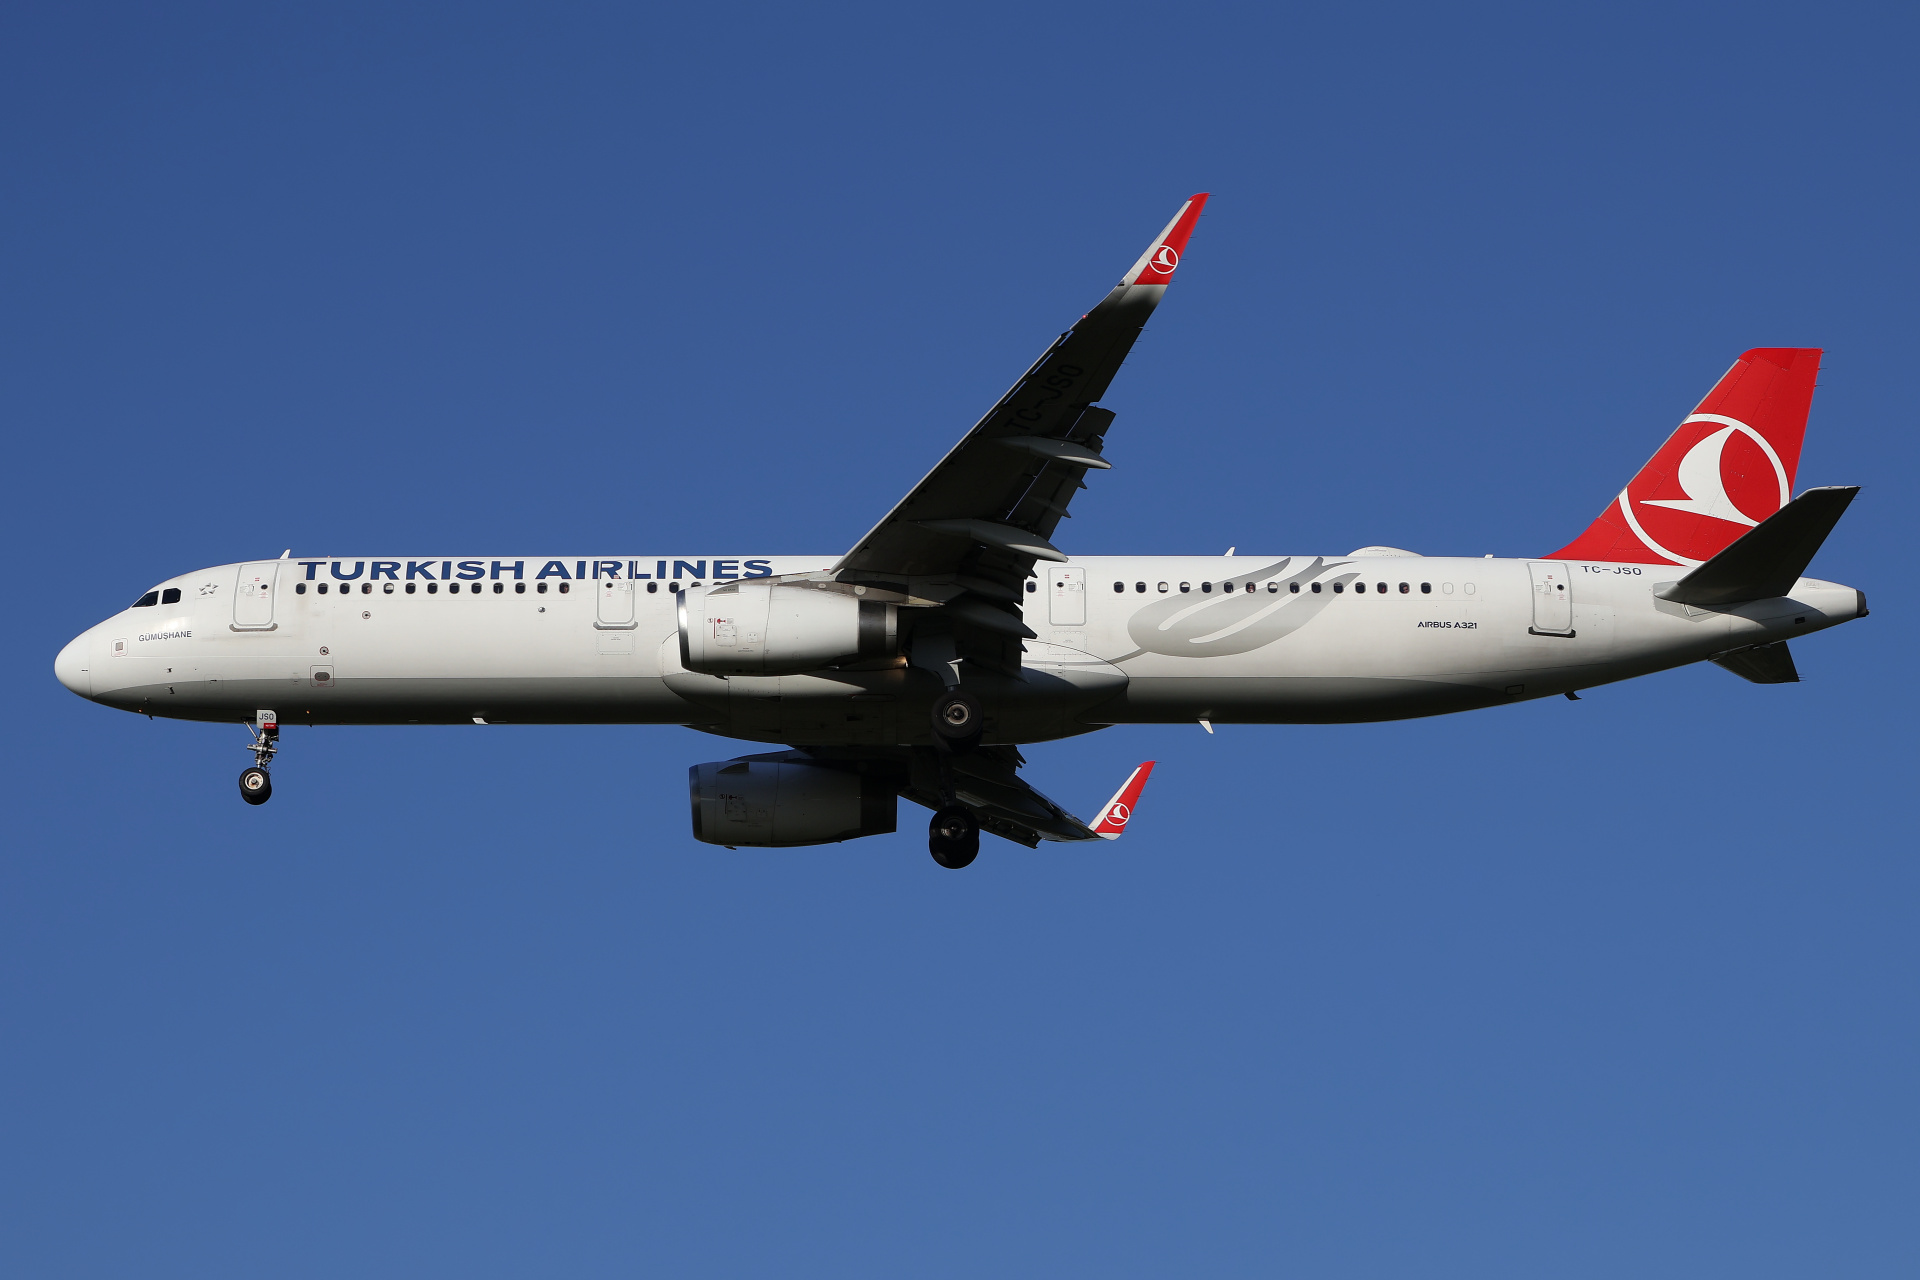 TC-JSO (Aircraft » EPWA Spotting » Airbus A321-200 » THY Turkish Airlines)